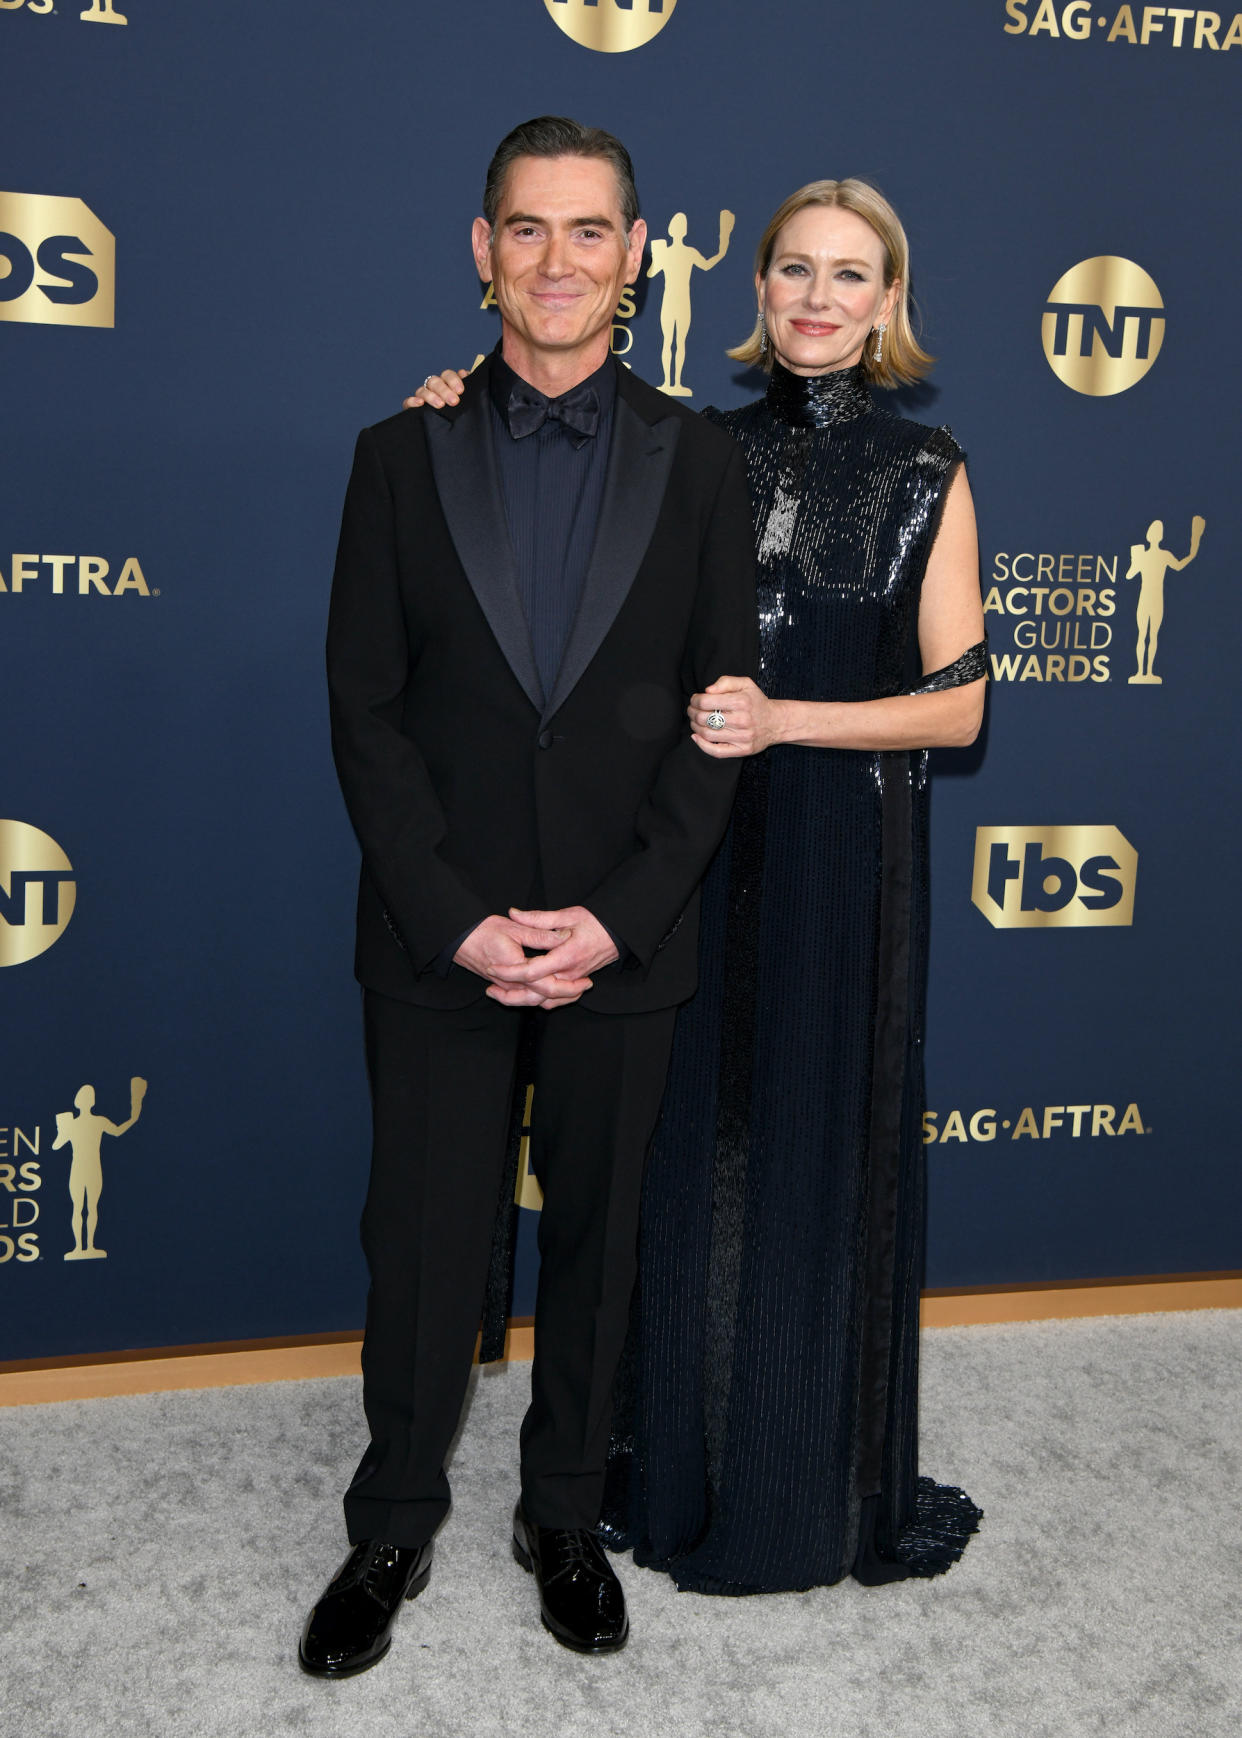 The actors made their red carpet debut as a couple at the 2022 Screen Actors Guild Awards at Barker Hangar on Feb. 27 in Santa Monica, California. (Axelle/Bauer-Griffin / FilmMagic)